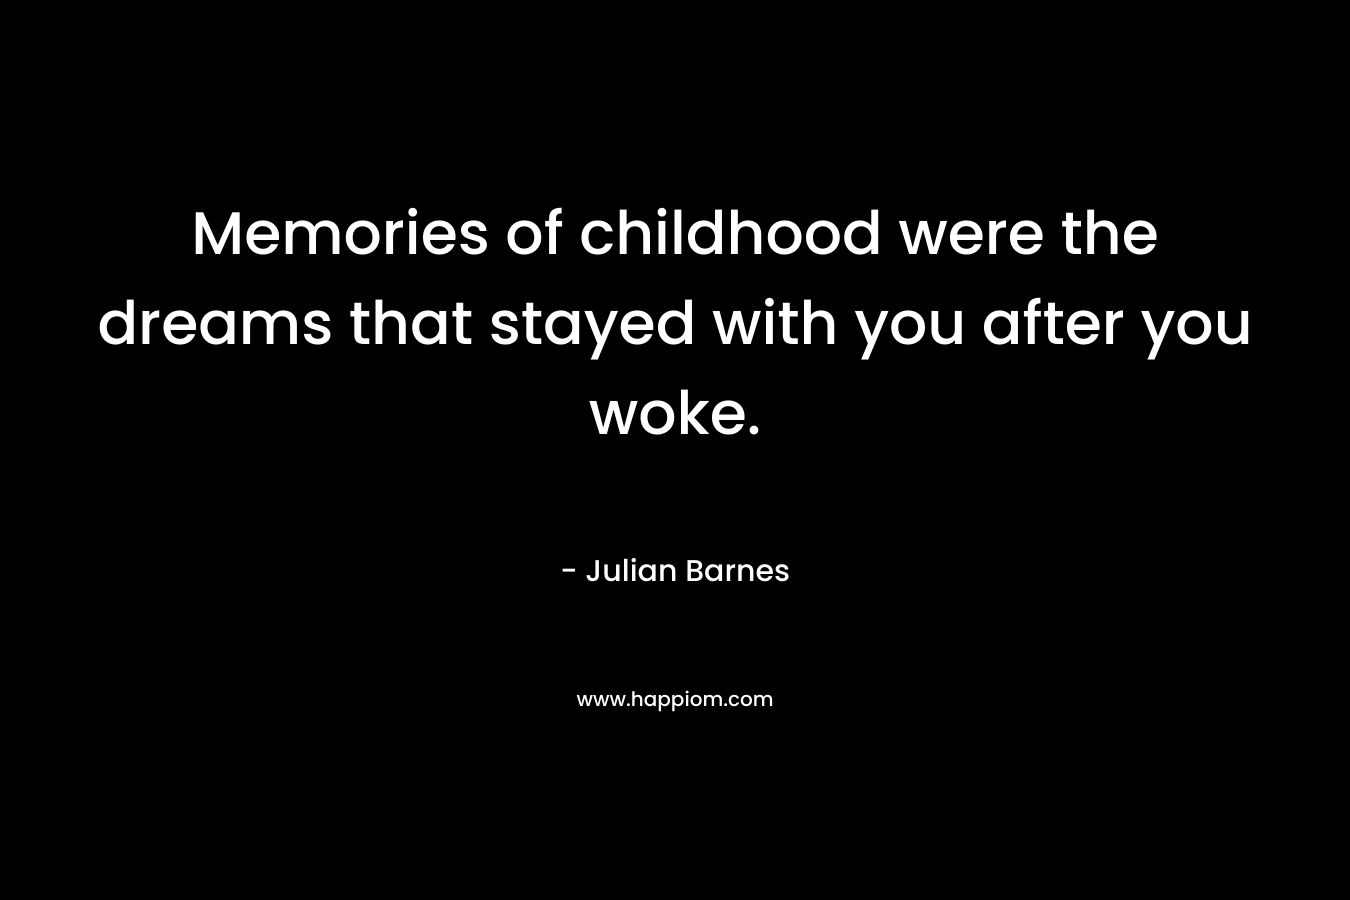 Memories of childhood were the dreams that stayed with you after you woke.